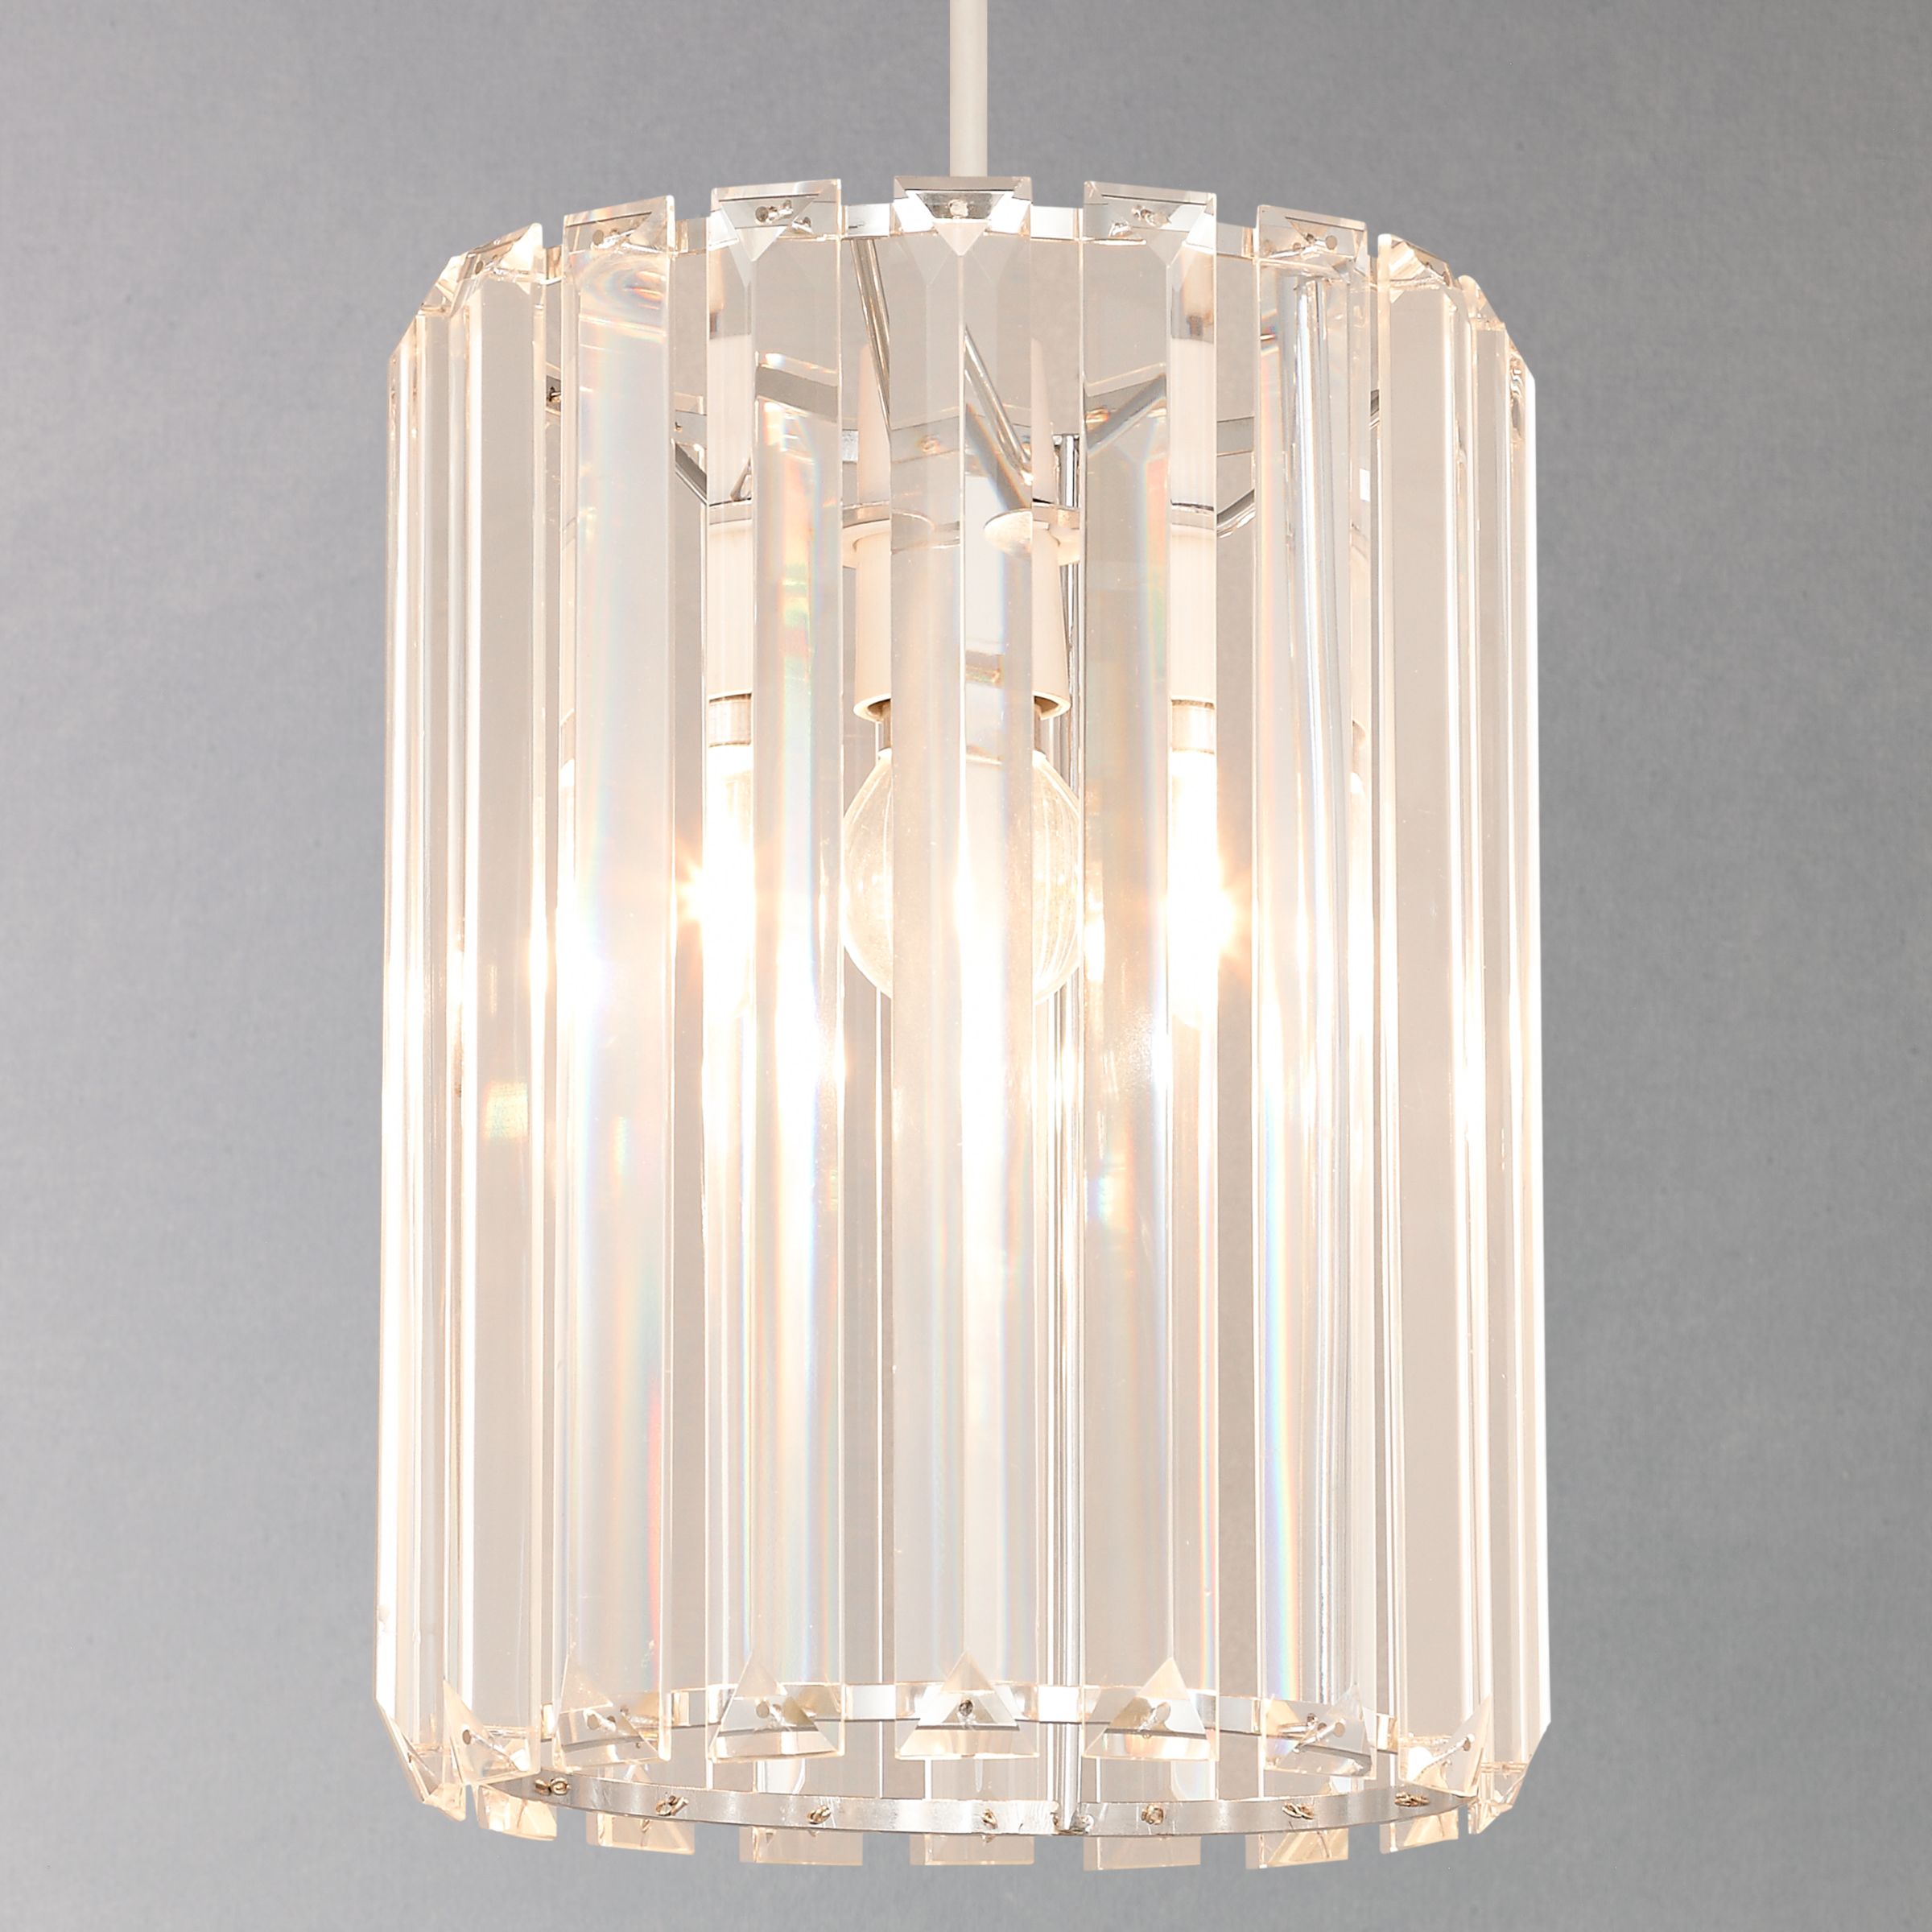 Photo of John lewis frieda easy-to-fit crystal ceiling shade